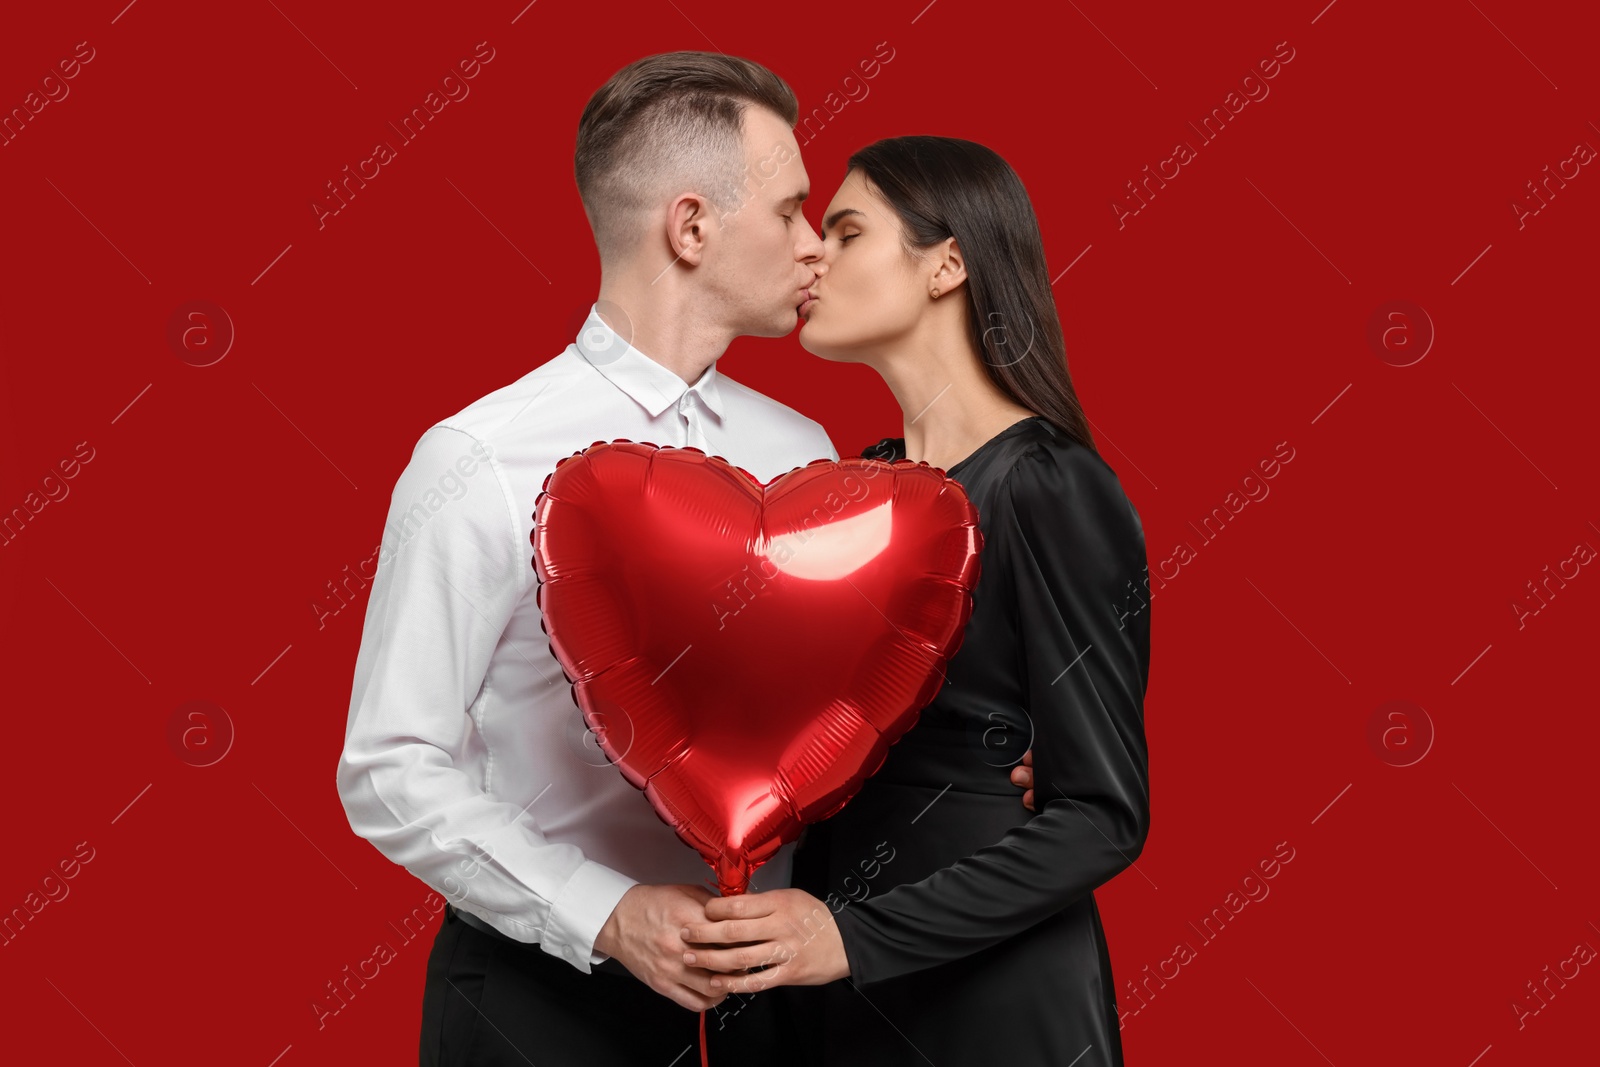 Photo of Lovely couple with heart shaped balloon kissing on red background. Valentine's day celebration